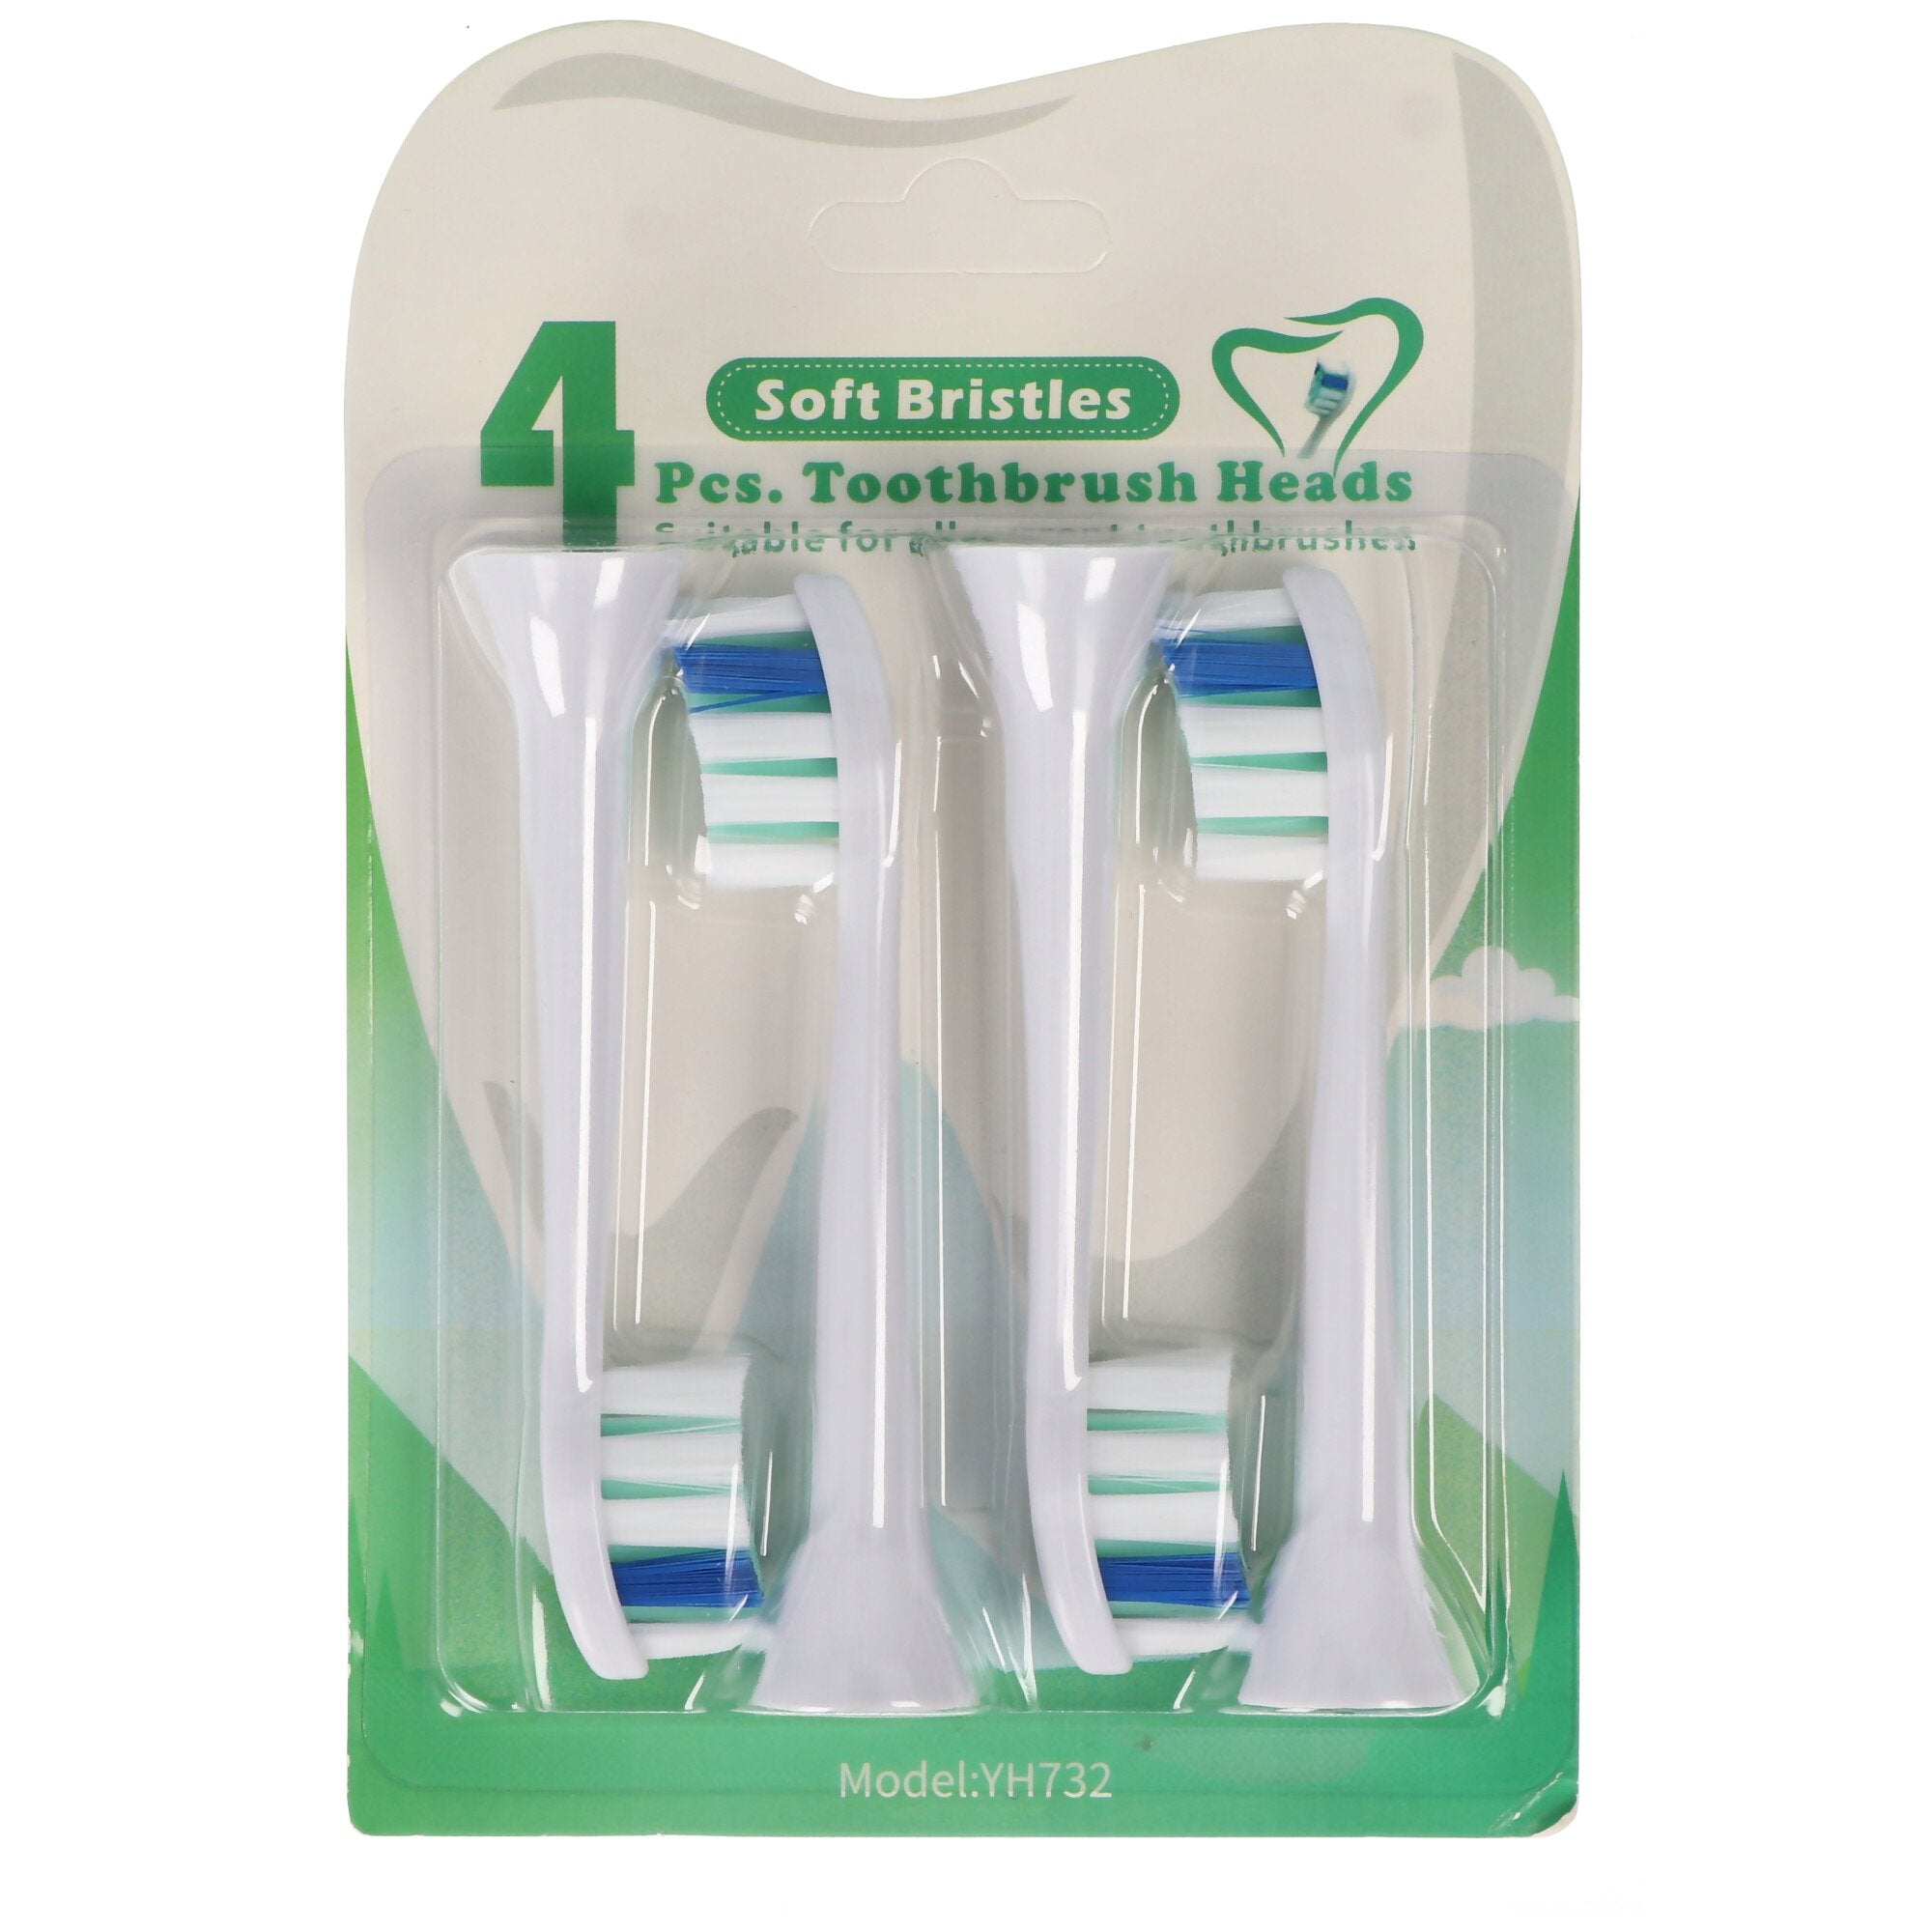 Pack of 4 Deep Cleaning Brush replacement toothbrush heads for electric toothbrushes from Philips, s